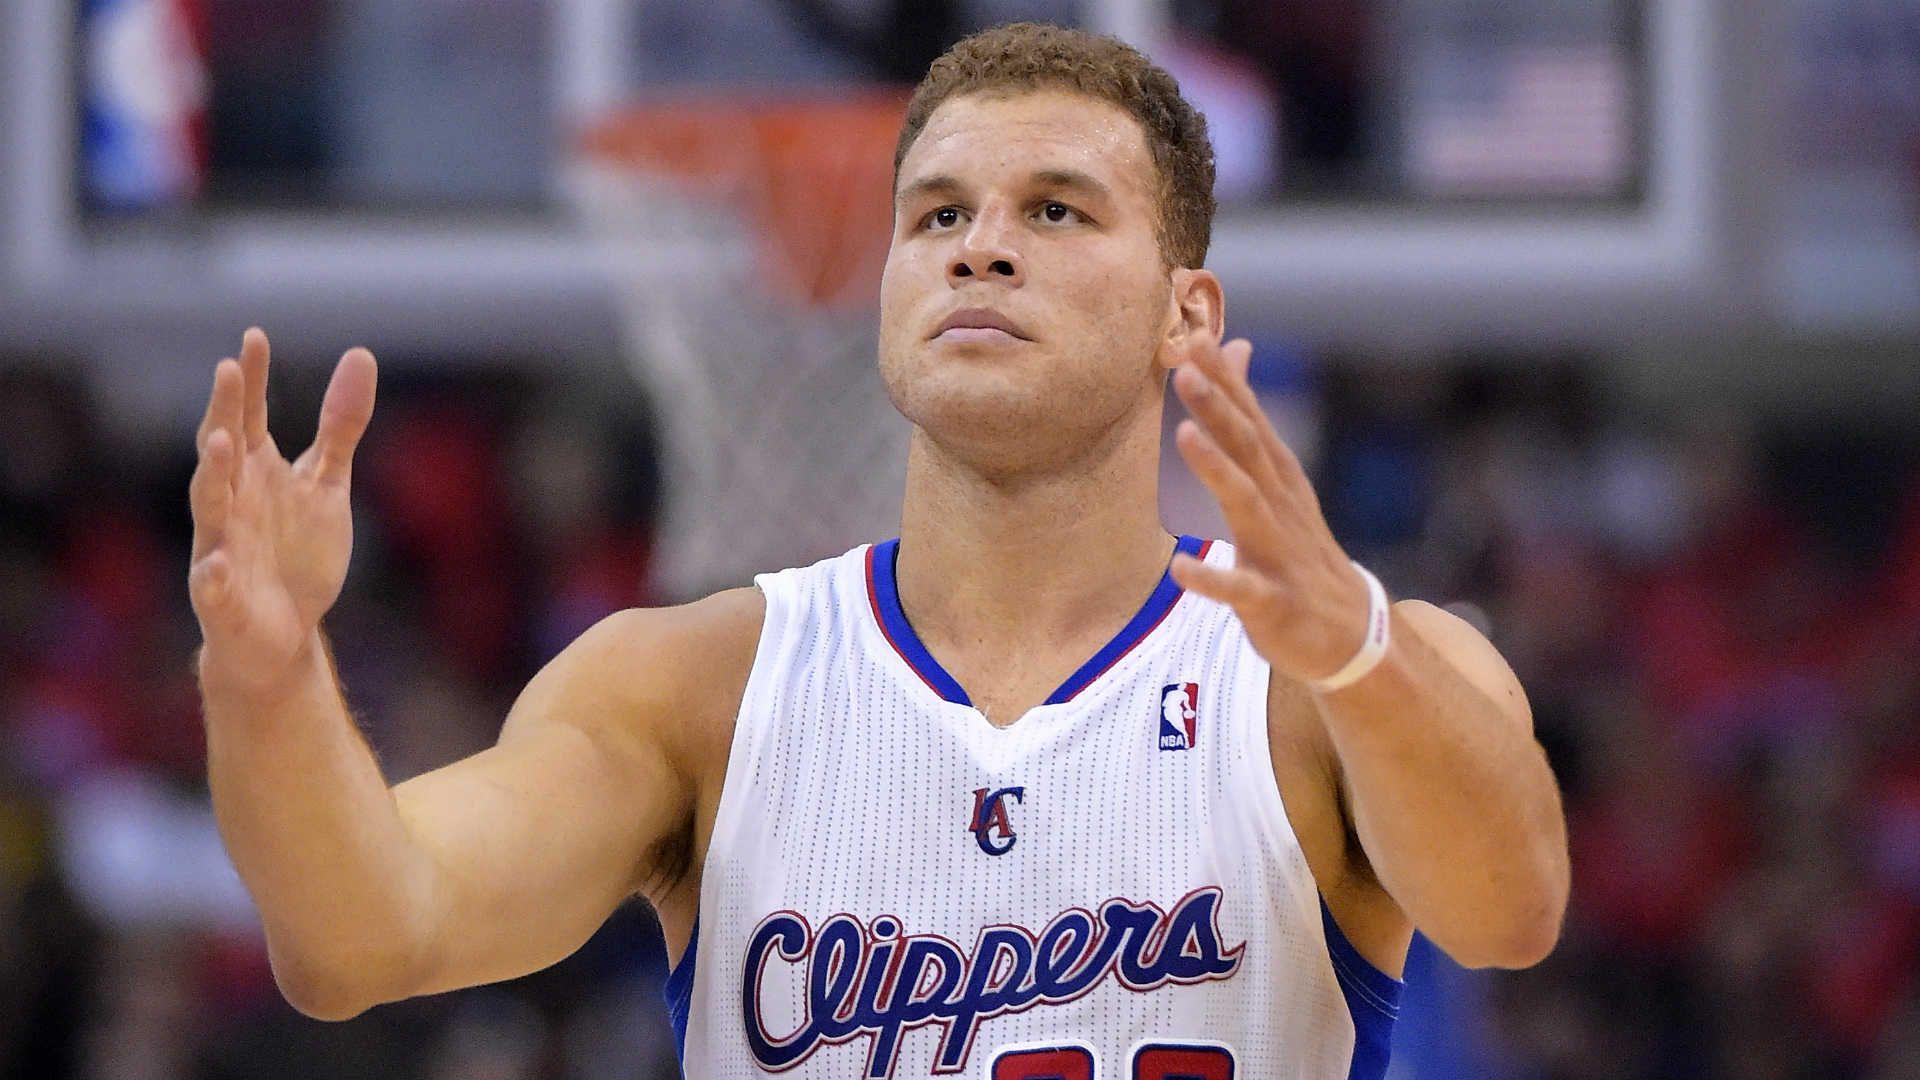 Blake Griffin insists extent of back injury was exaggerated. NBA